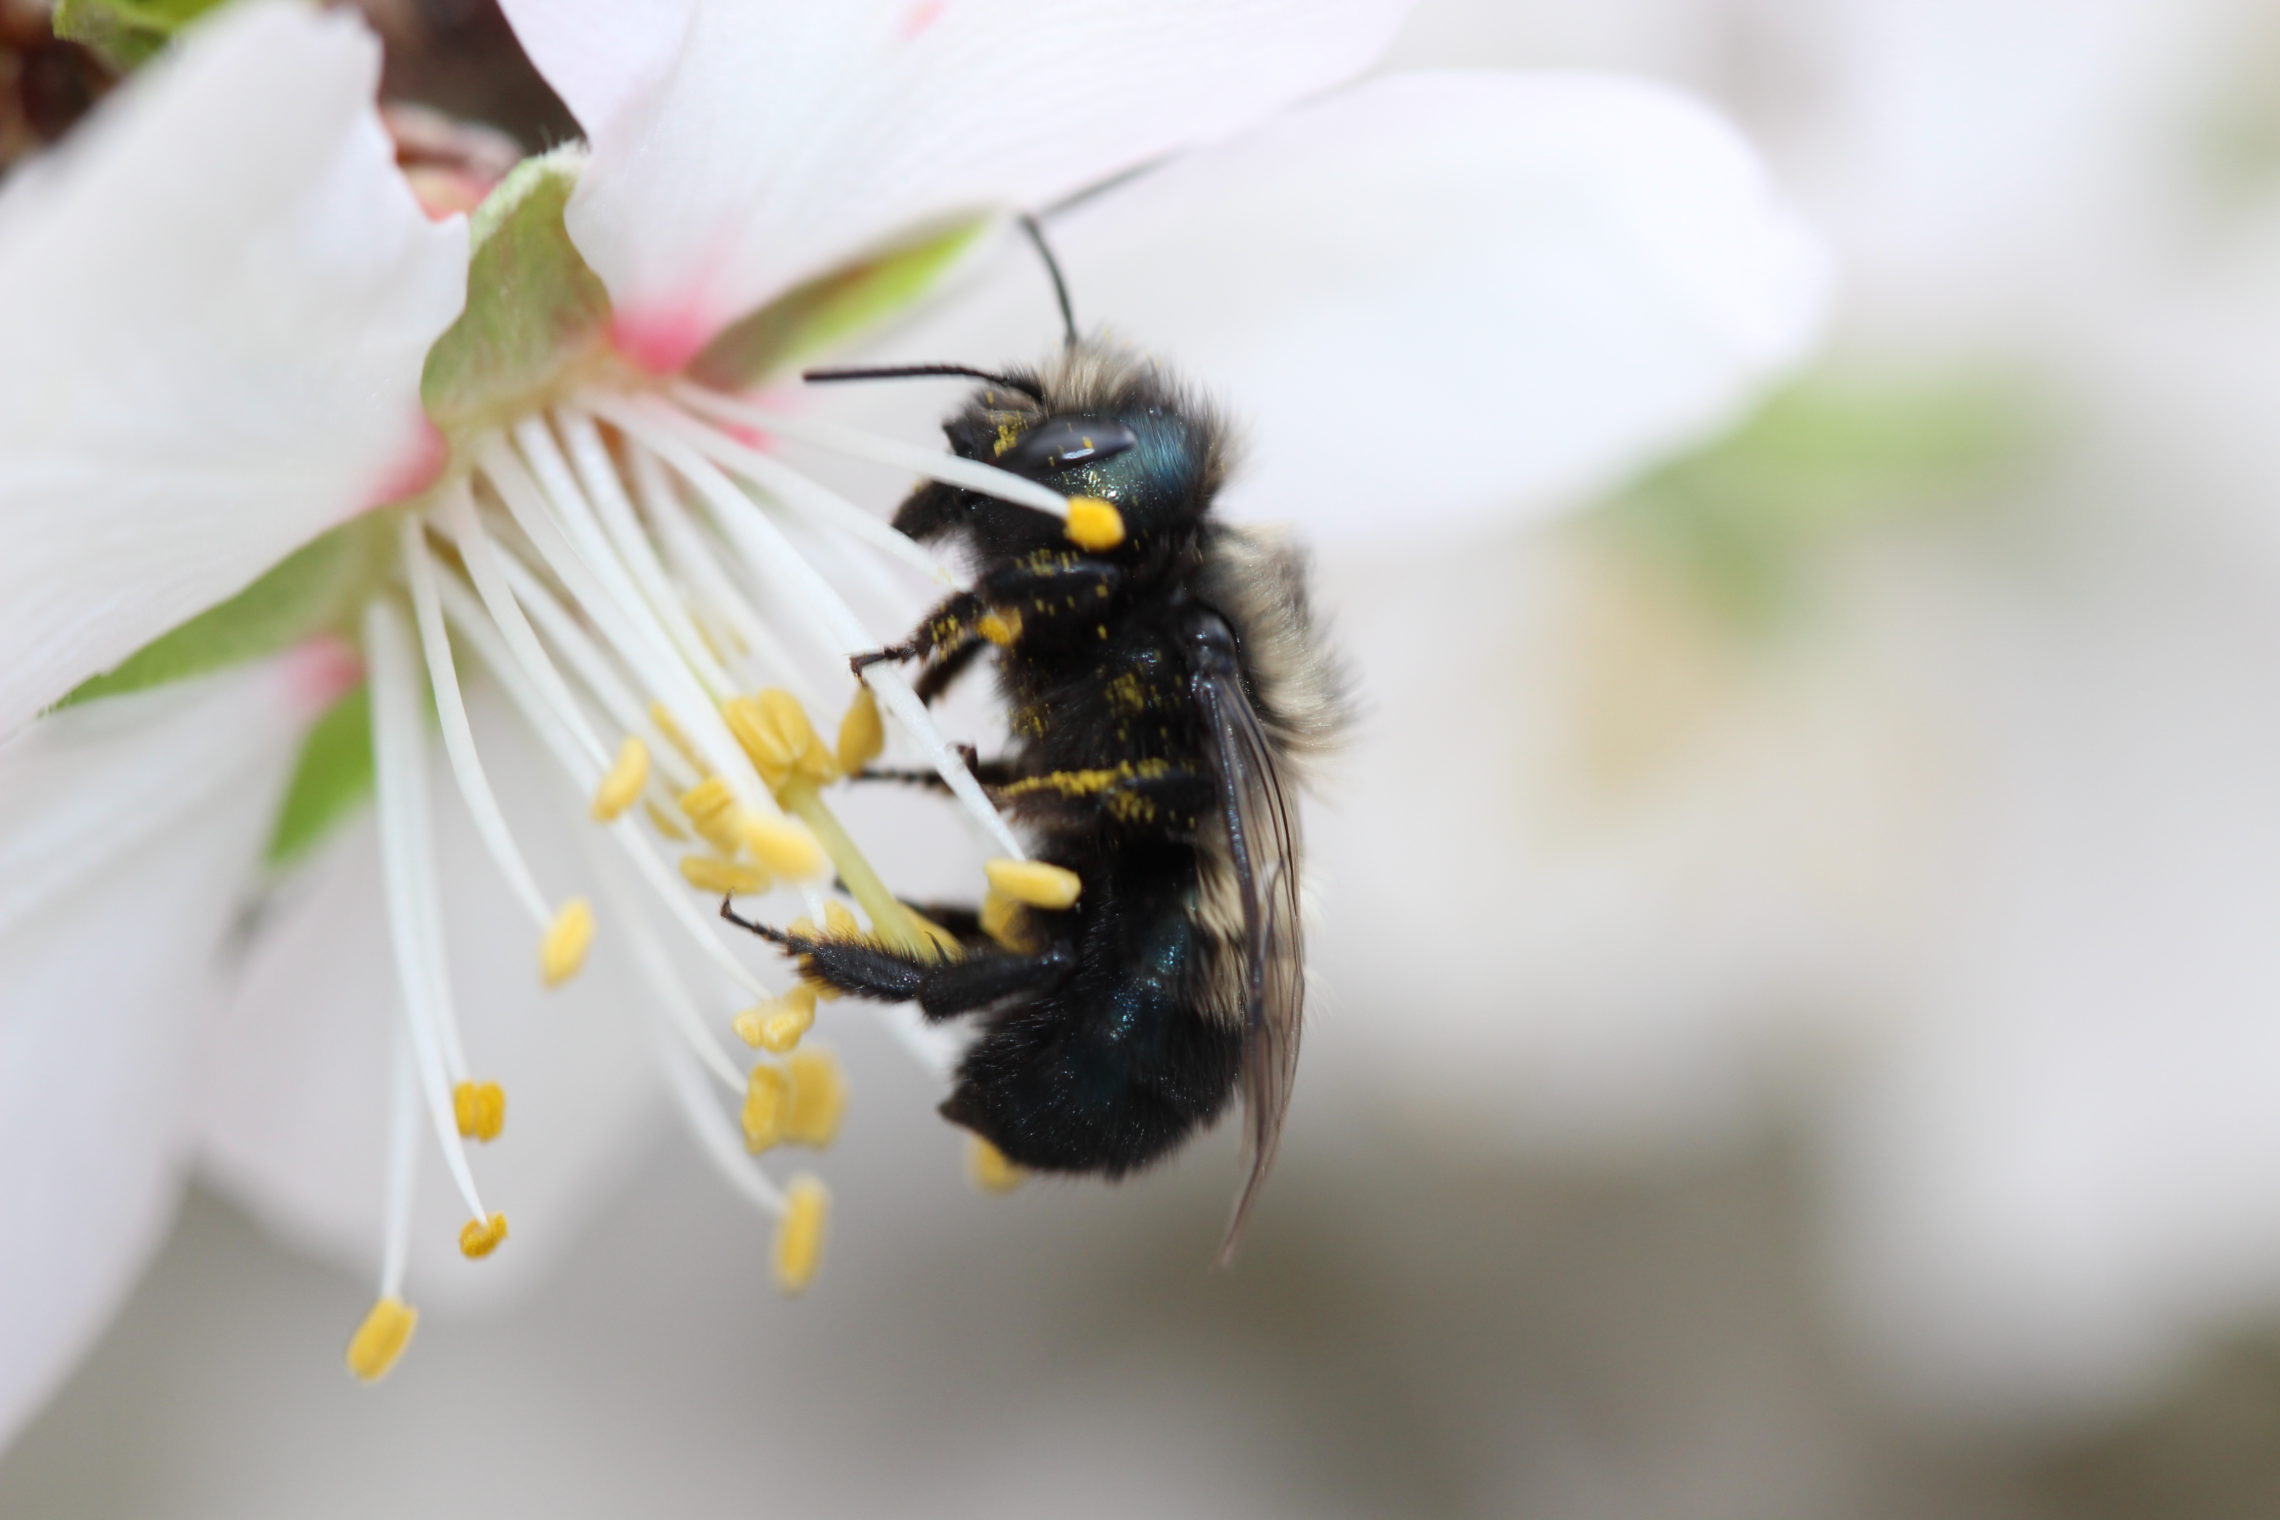 Osmia lignaria or the blue orchard bee visits a blossom. While it won’t make honey, this bee is a superior pollinator than the honey bee. Credit: Natalie Boyle/US Department of Agriculture.